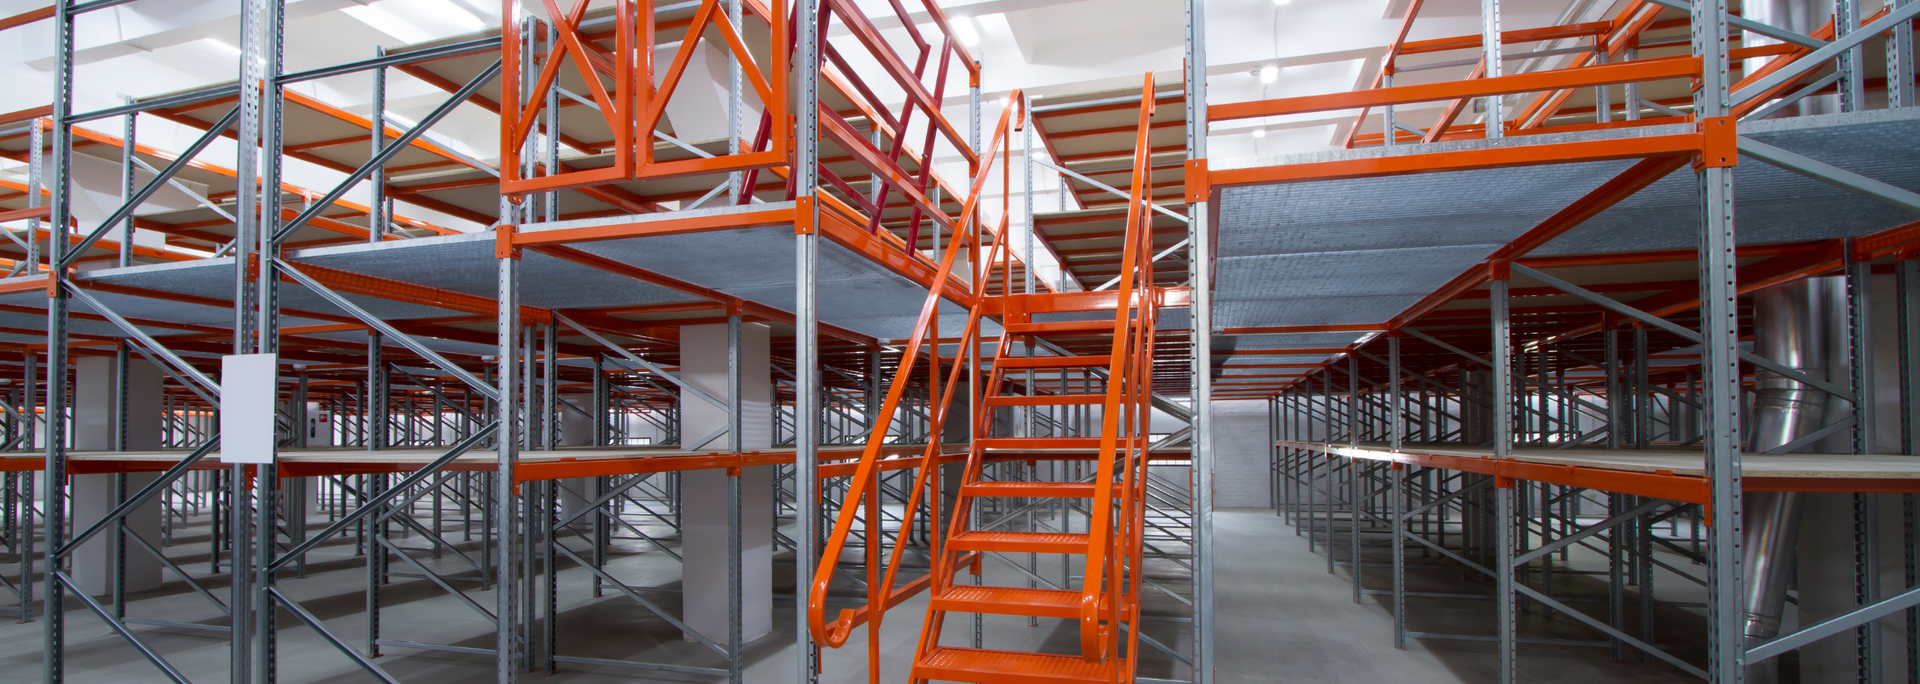 Picture of multi-tier racking